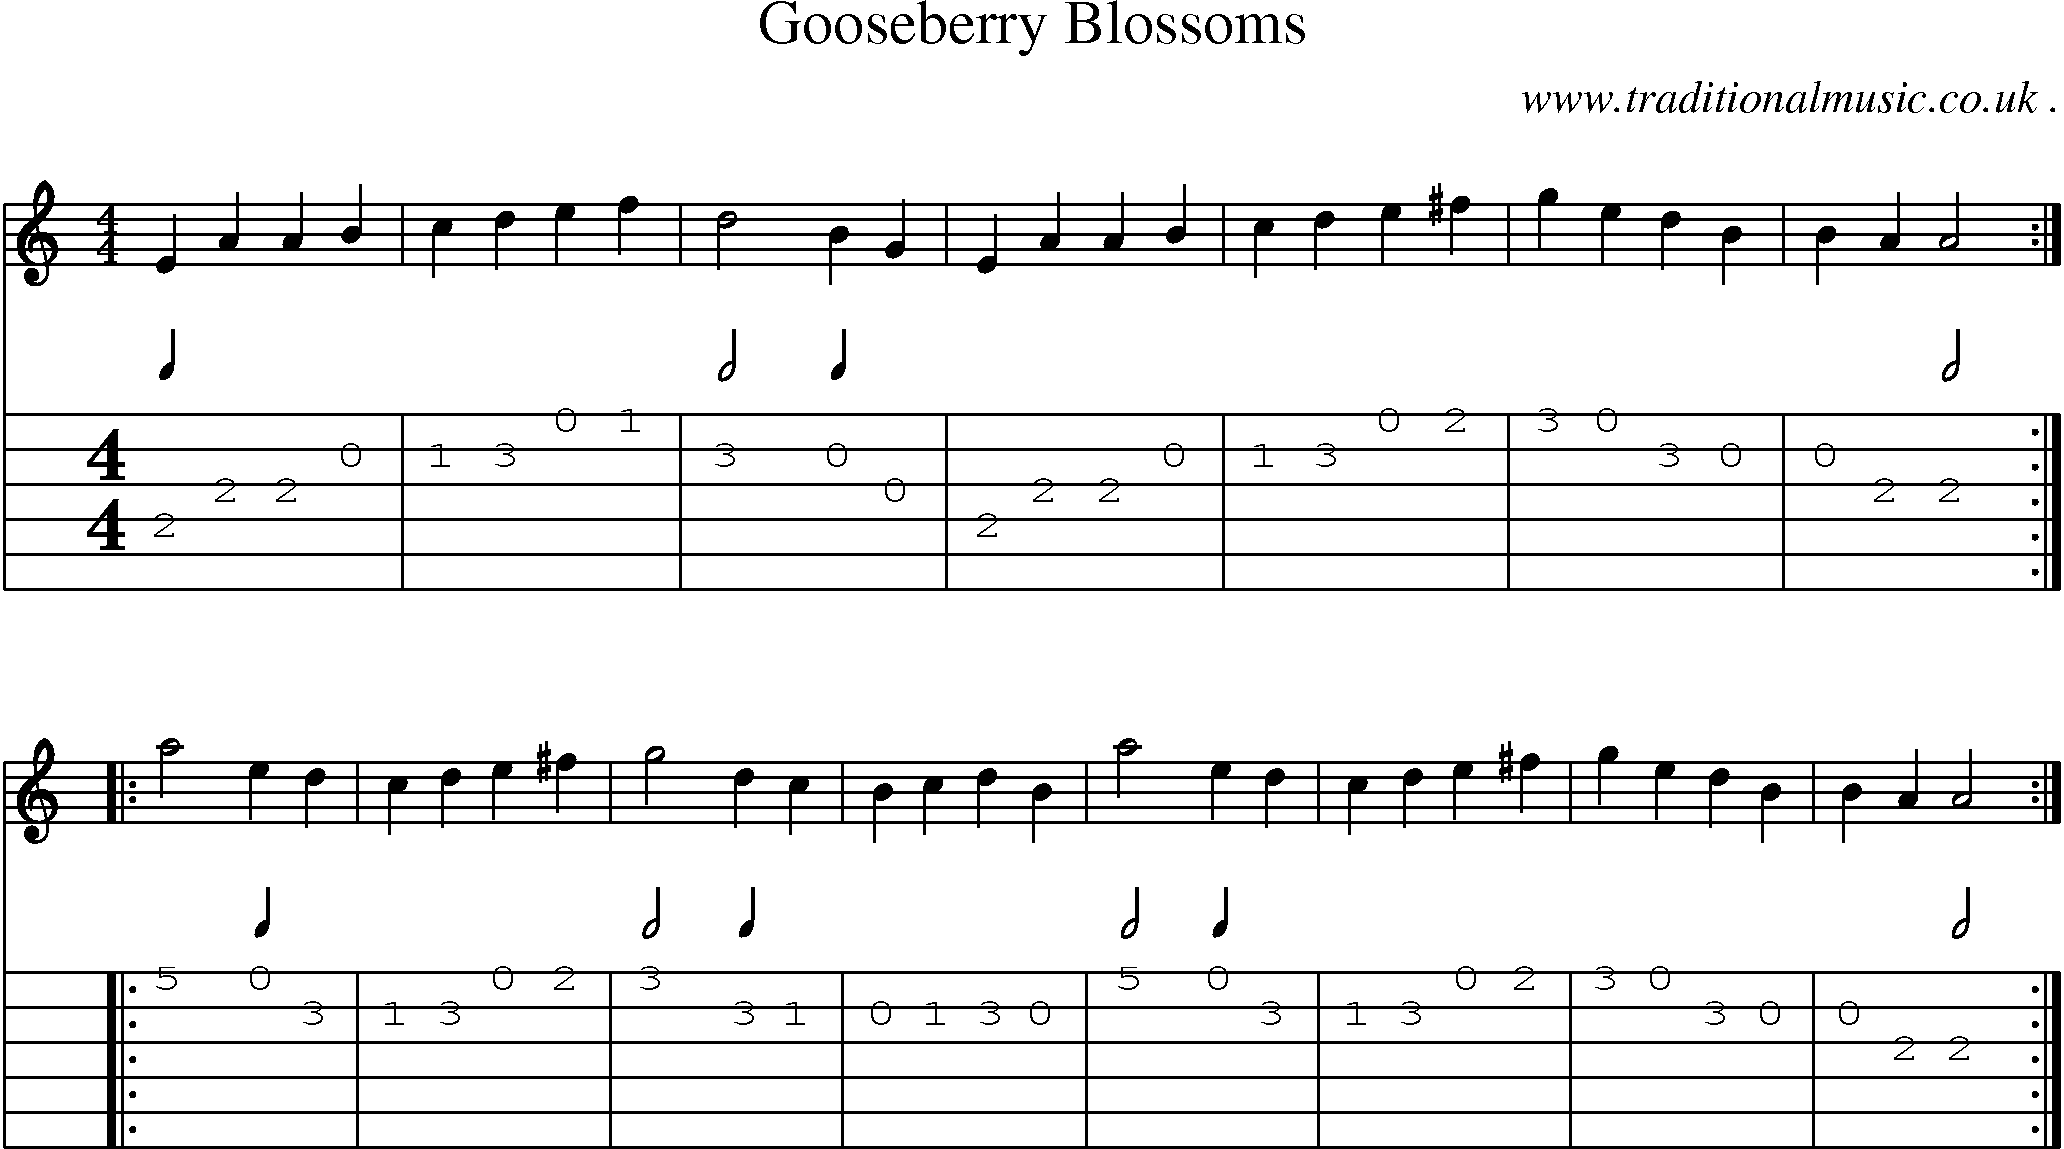 Sheet-Music and Guitar Tabs for Gooseberry Blossoms